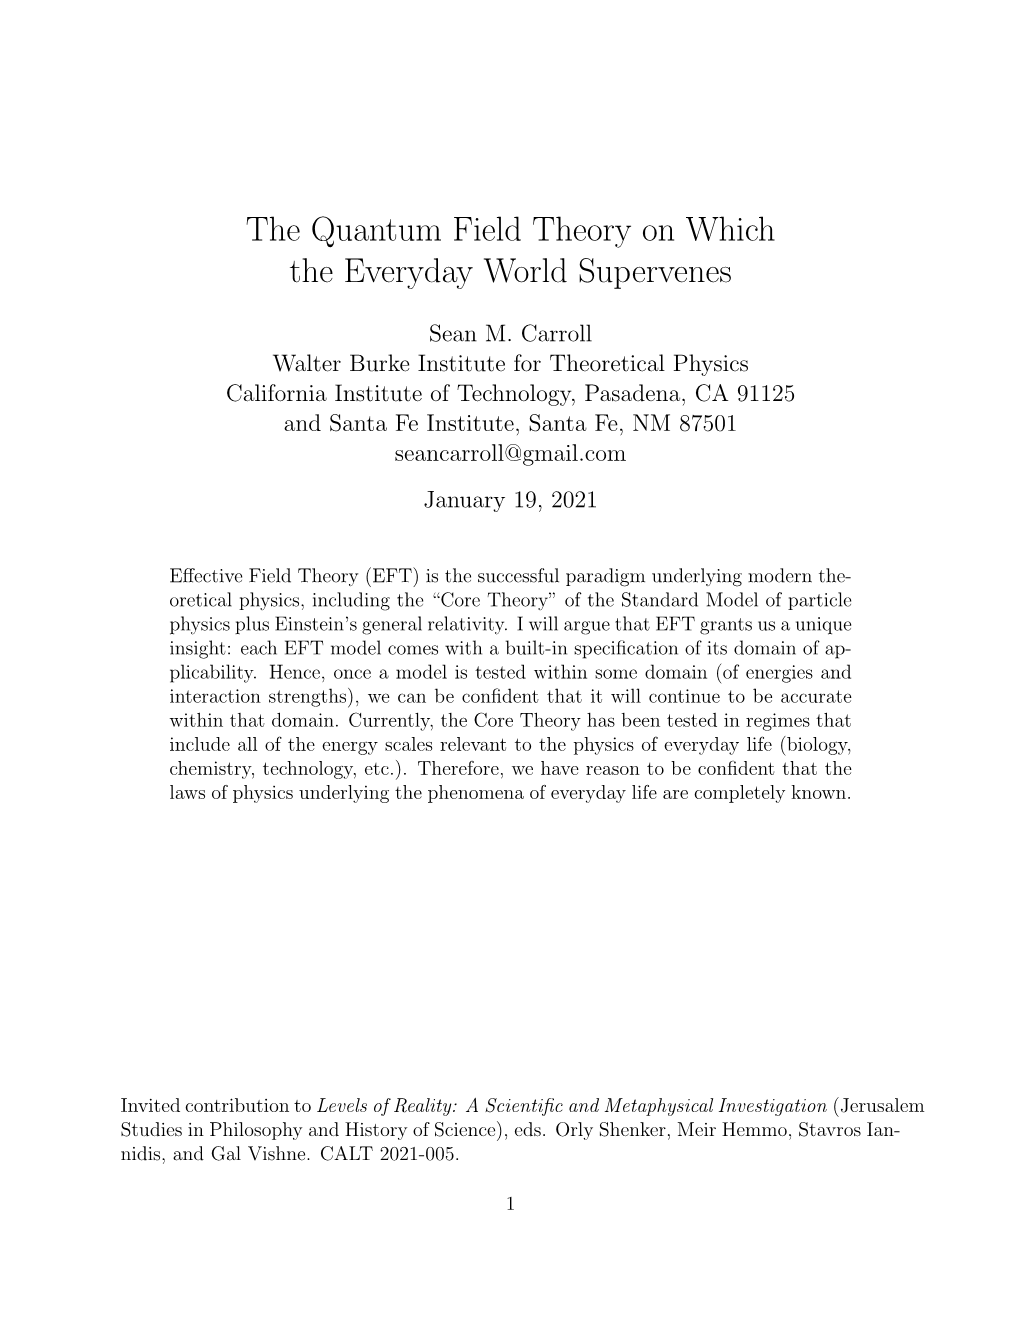 The Quantum Field Theory on Which the Everyday World Supervenes